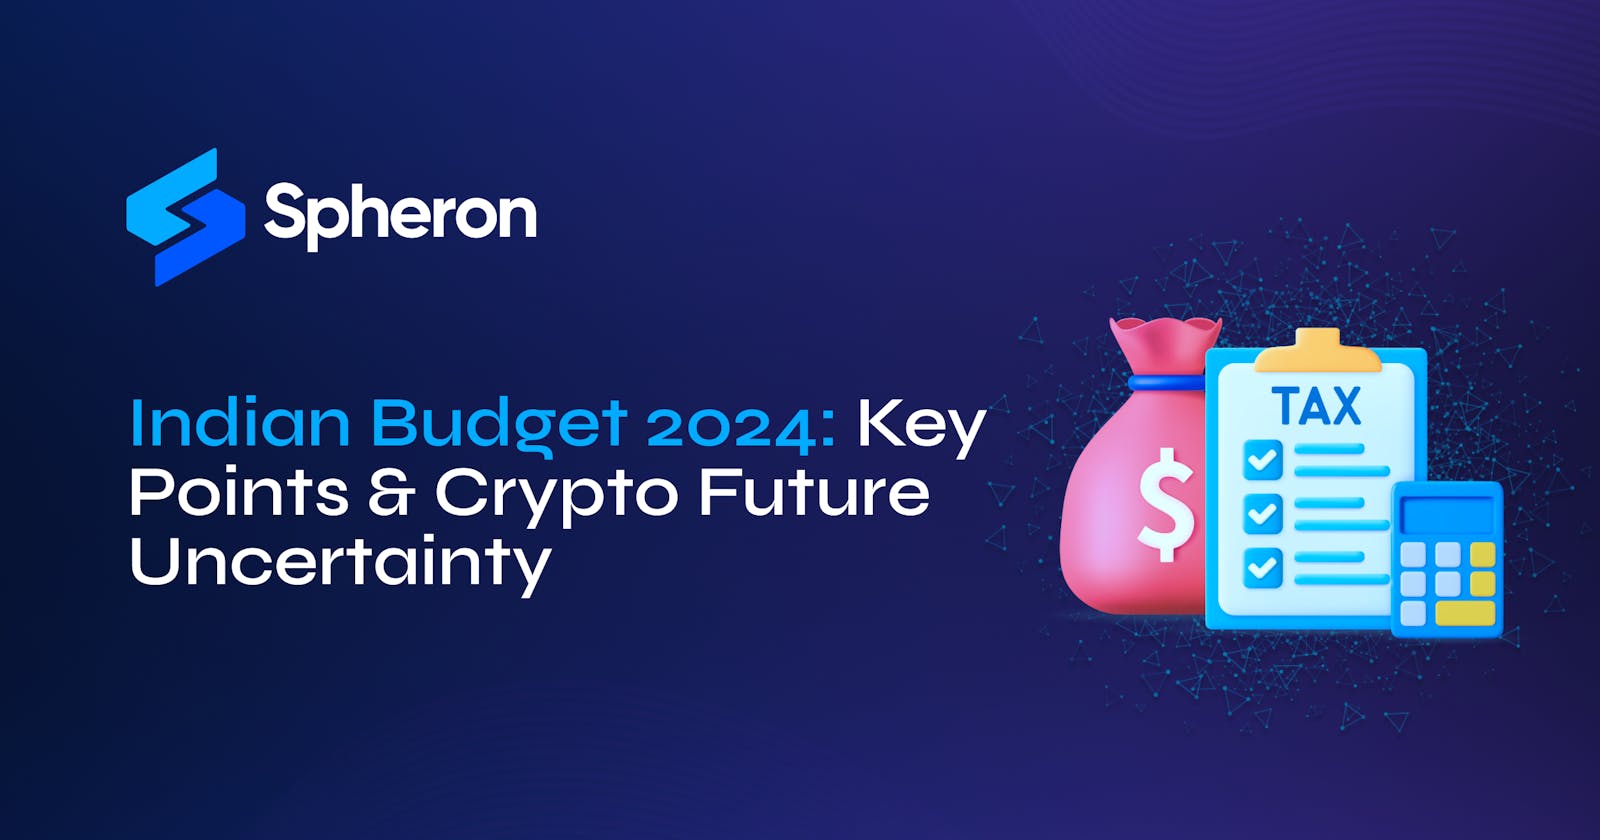 Indian Budget 2024: Key Points & Crypto Future Uncertainty